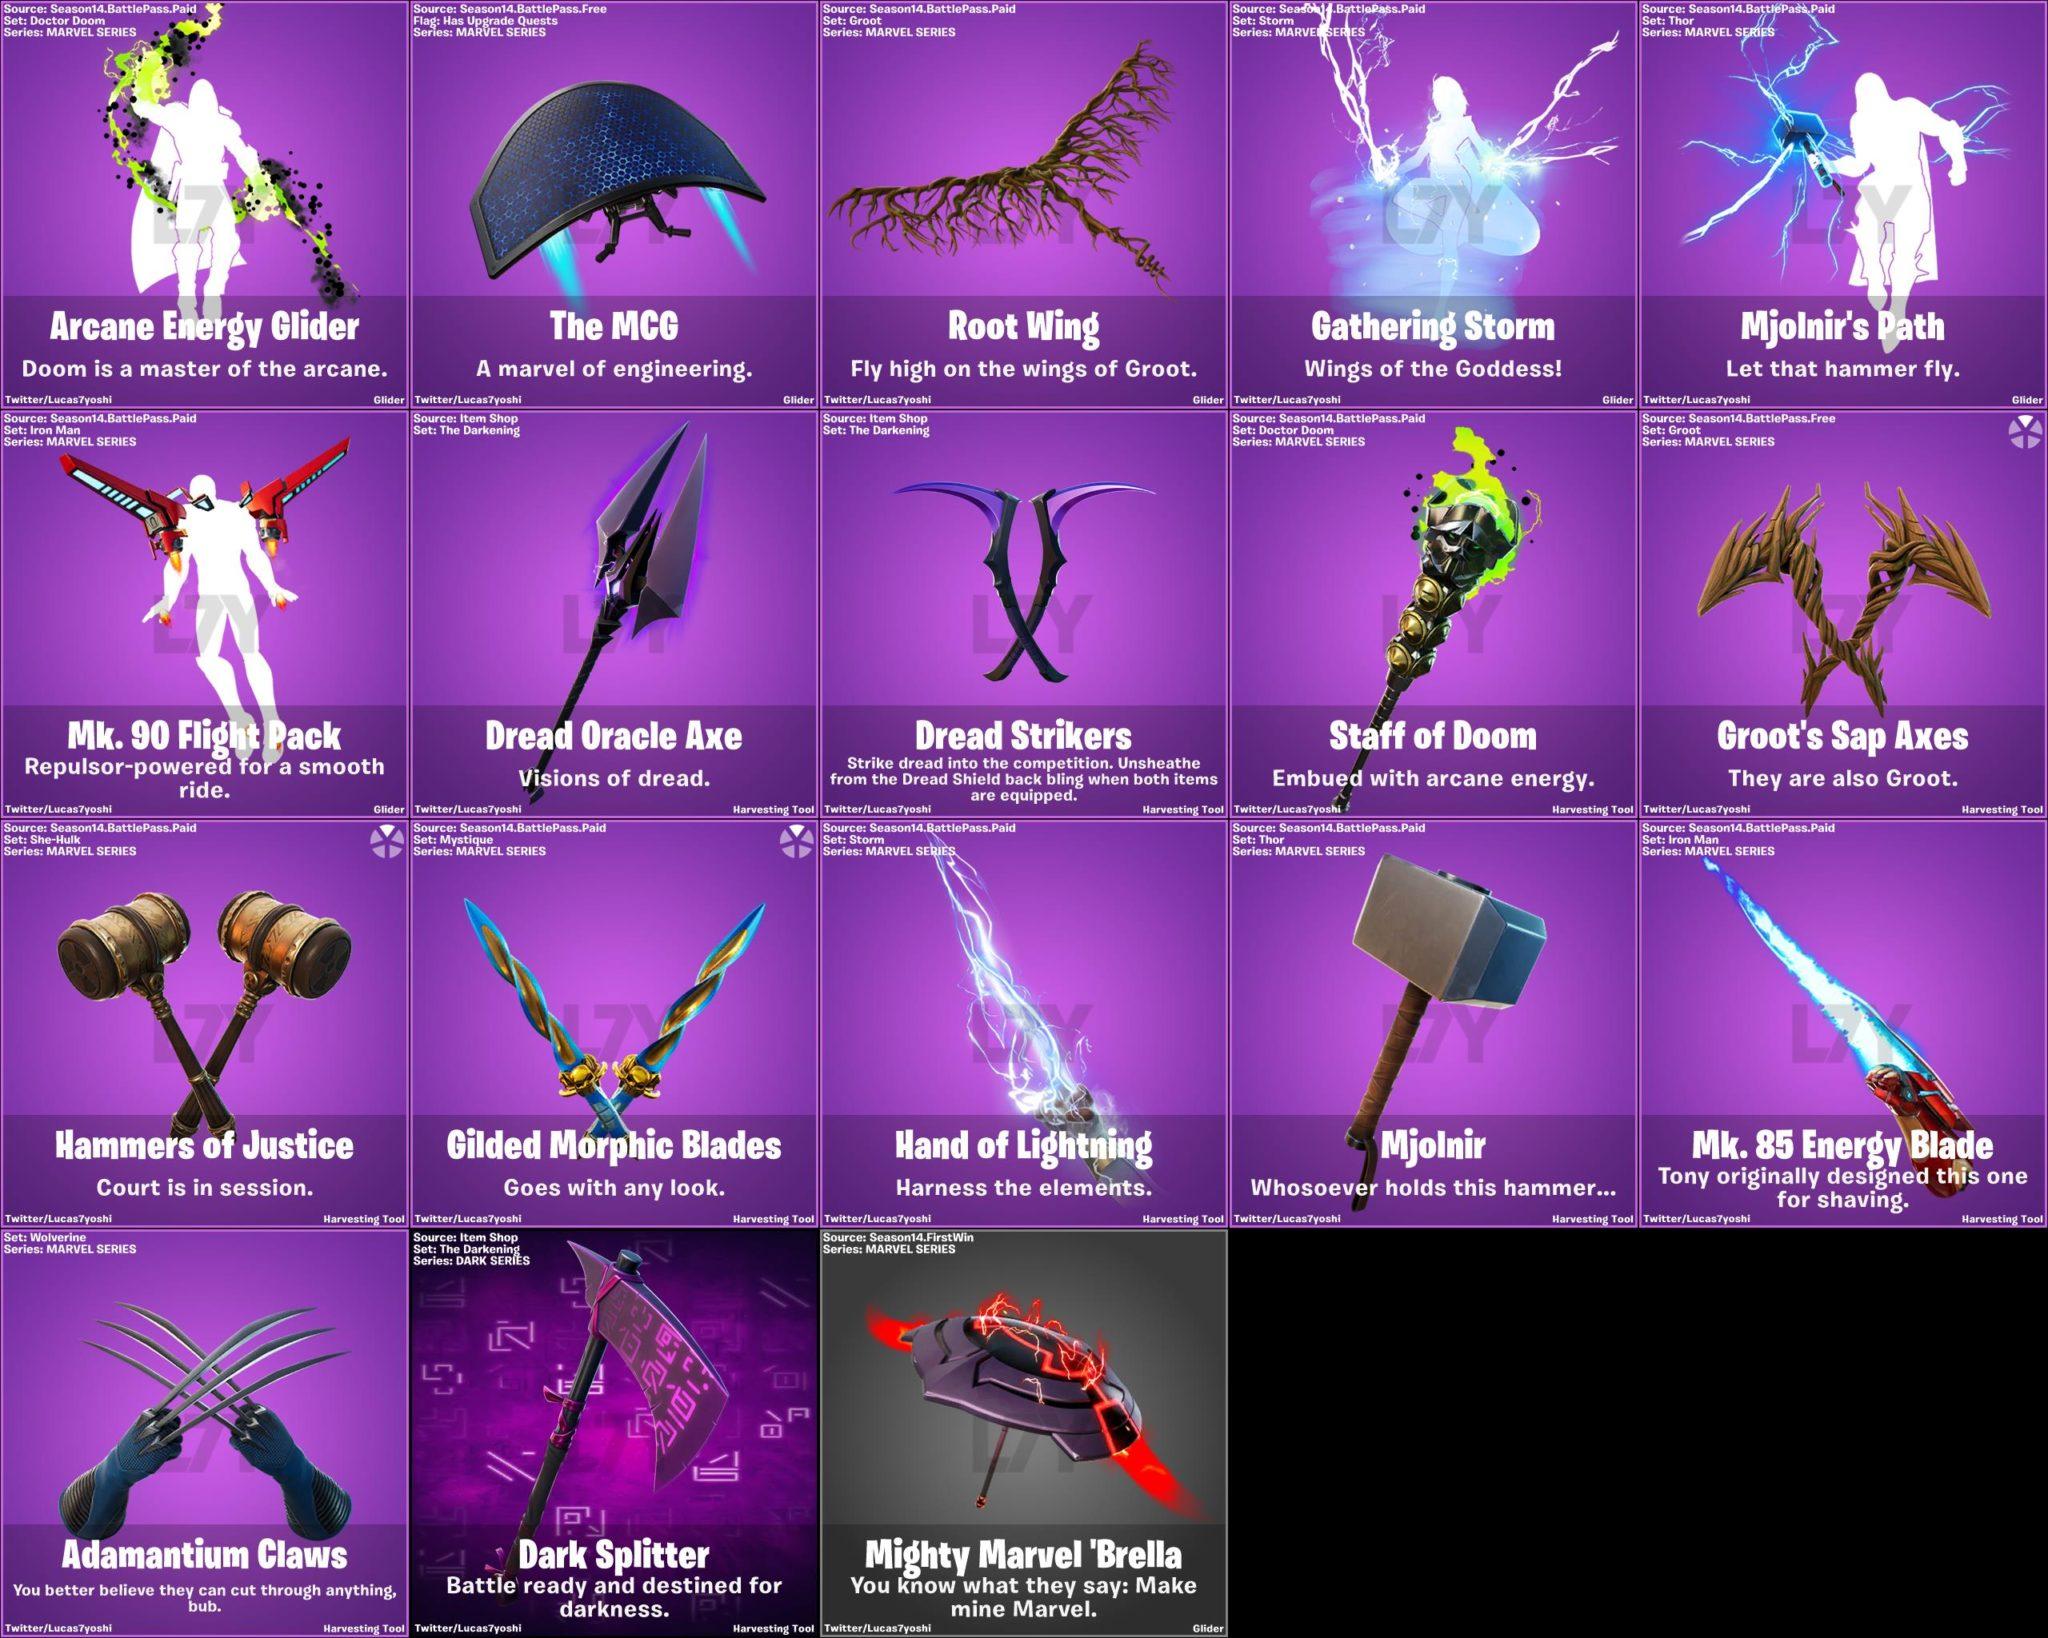 New pickaxes and gliders in Fortnite Season 4